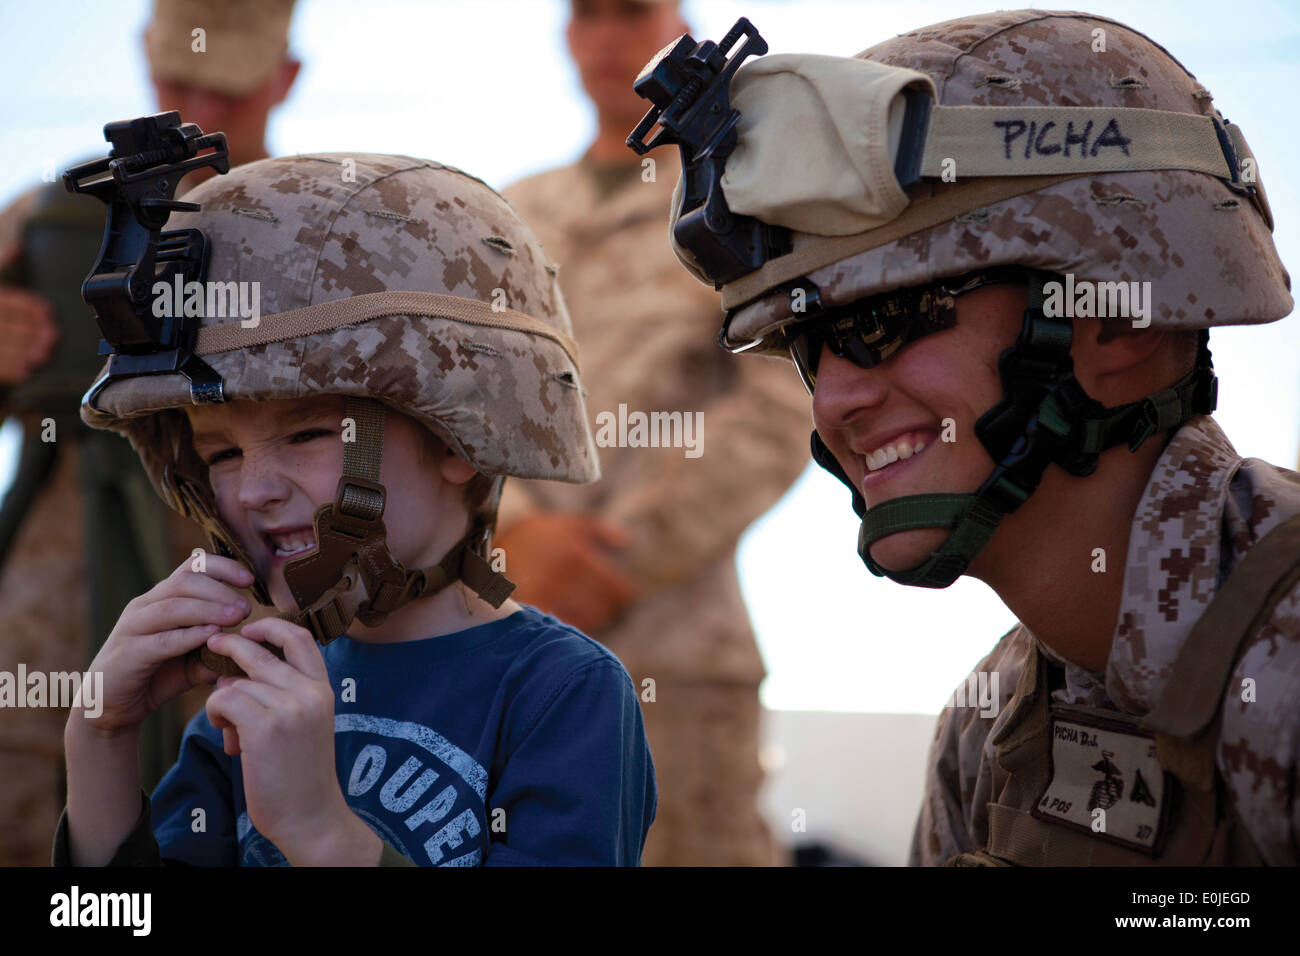 Lance Cpl. Don Picha, right, with 2nd Battalion, 7th Marine Regiment, poses for a picture with a child after letting him try on Stock Photo